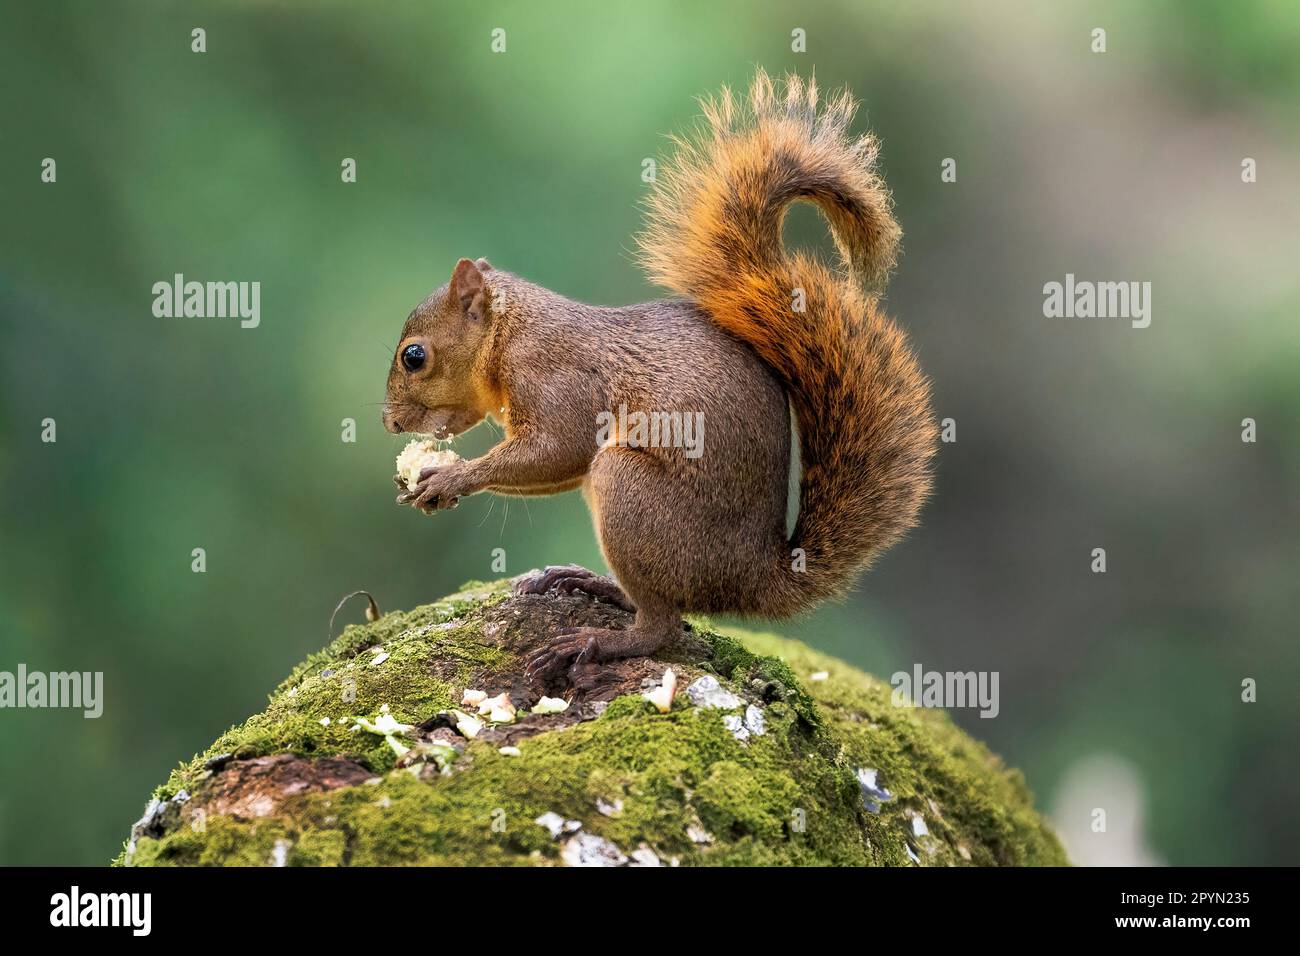 red-tailed squirrel (Sciurus granatensis) eating on top of a rock. Stock Photo